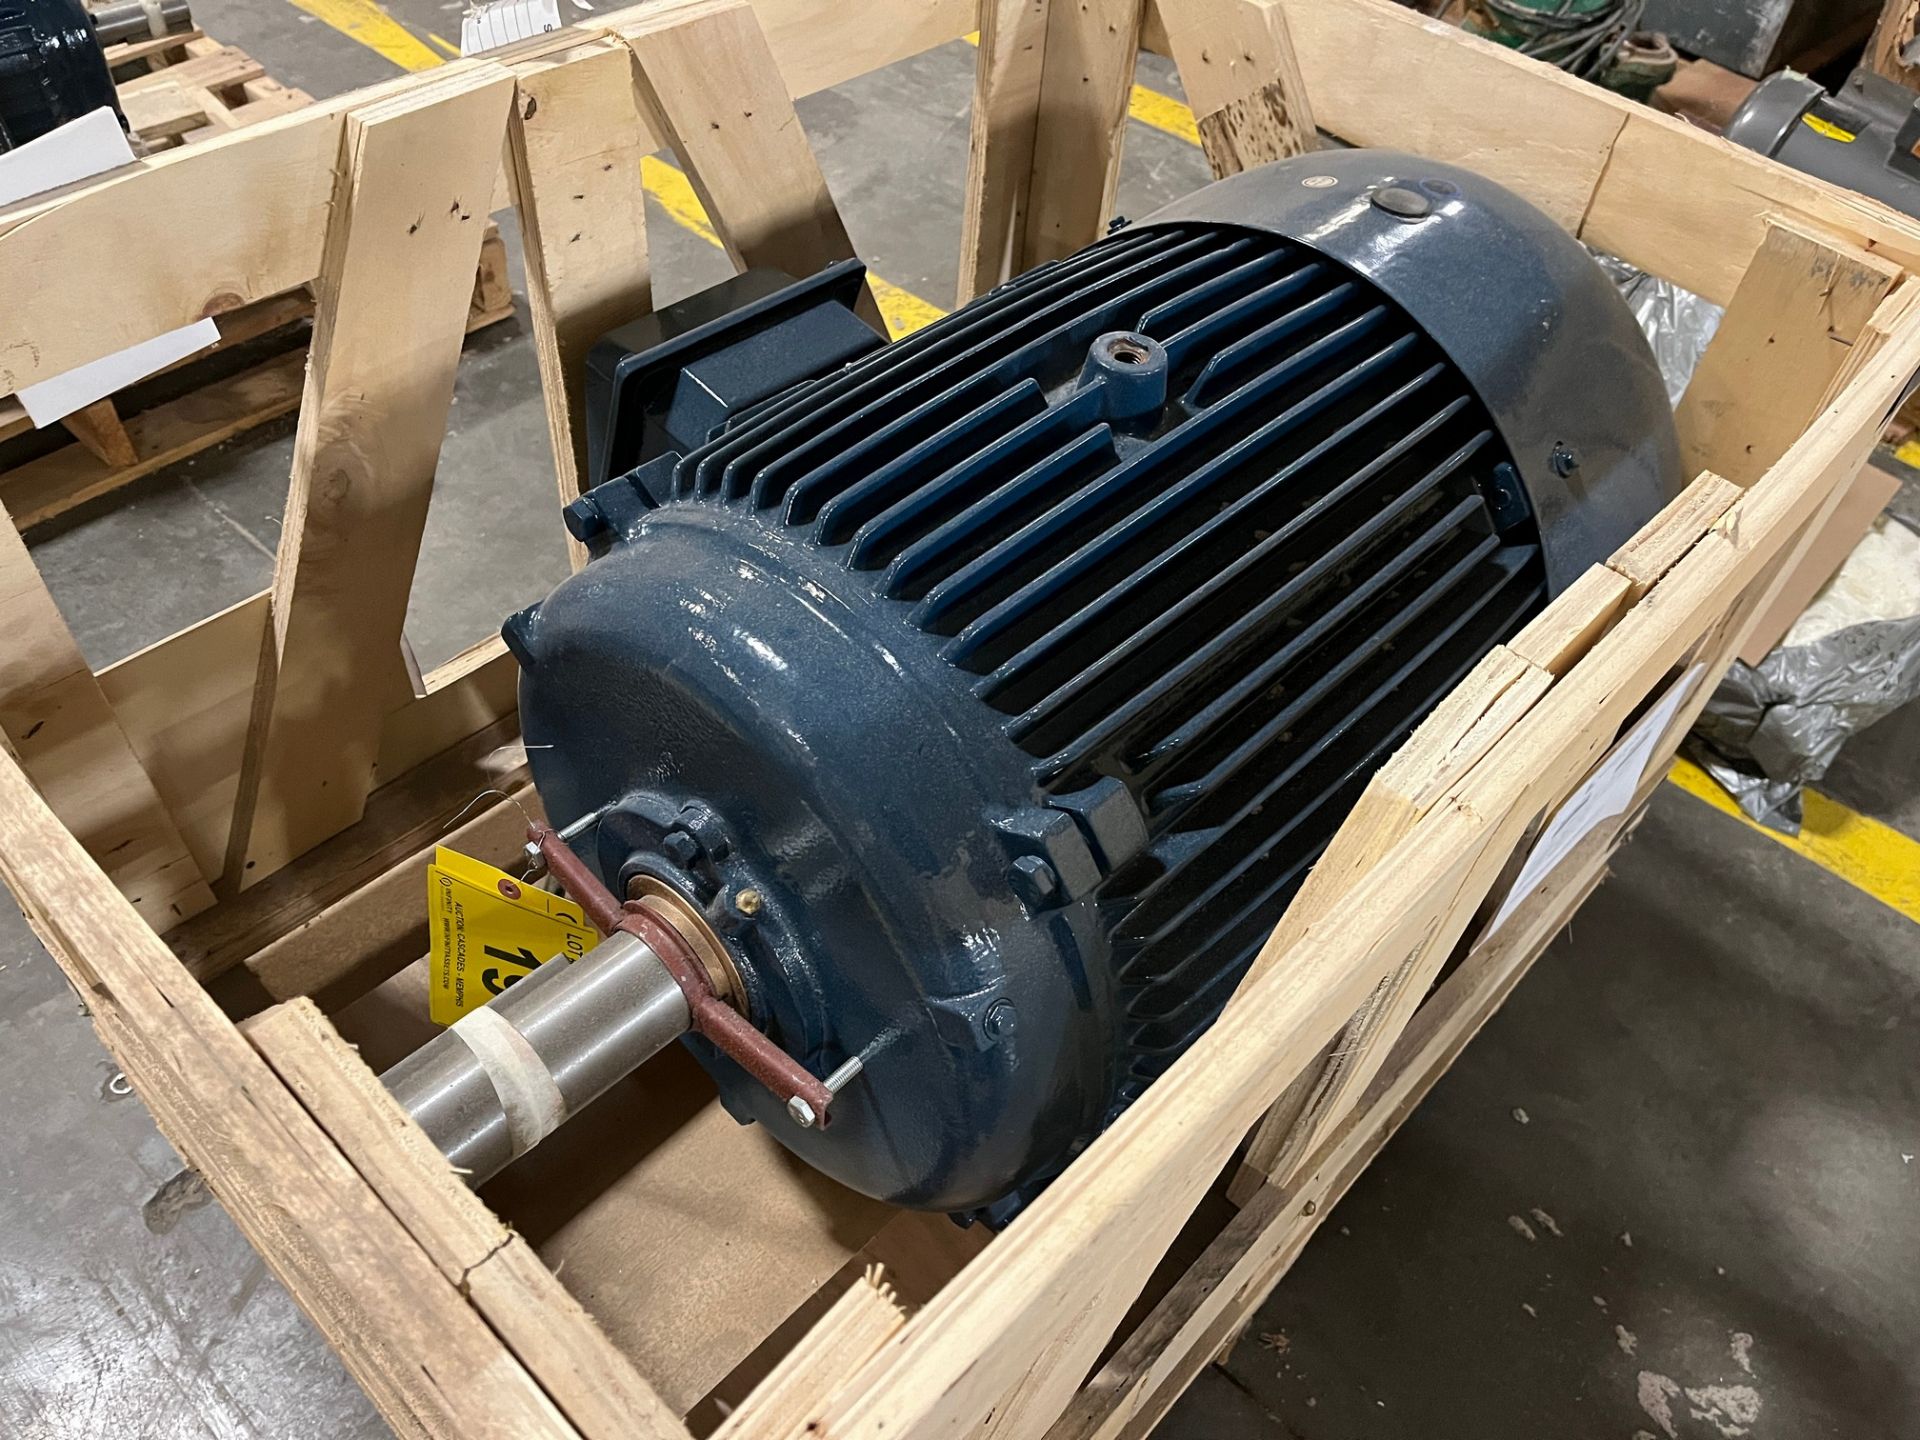 NORTH AMERICAN ELECTRIC AC INDUCTION MOTOR, 75HP, 1,780 RPM, 208-230/460V, 365T FRAME (PAPER MACHINE